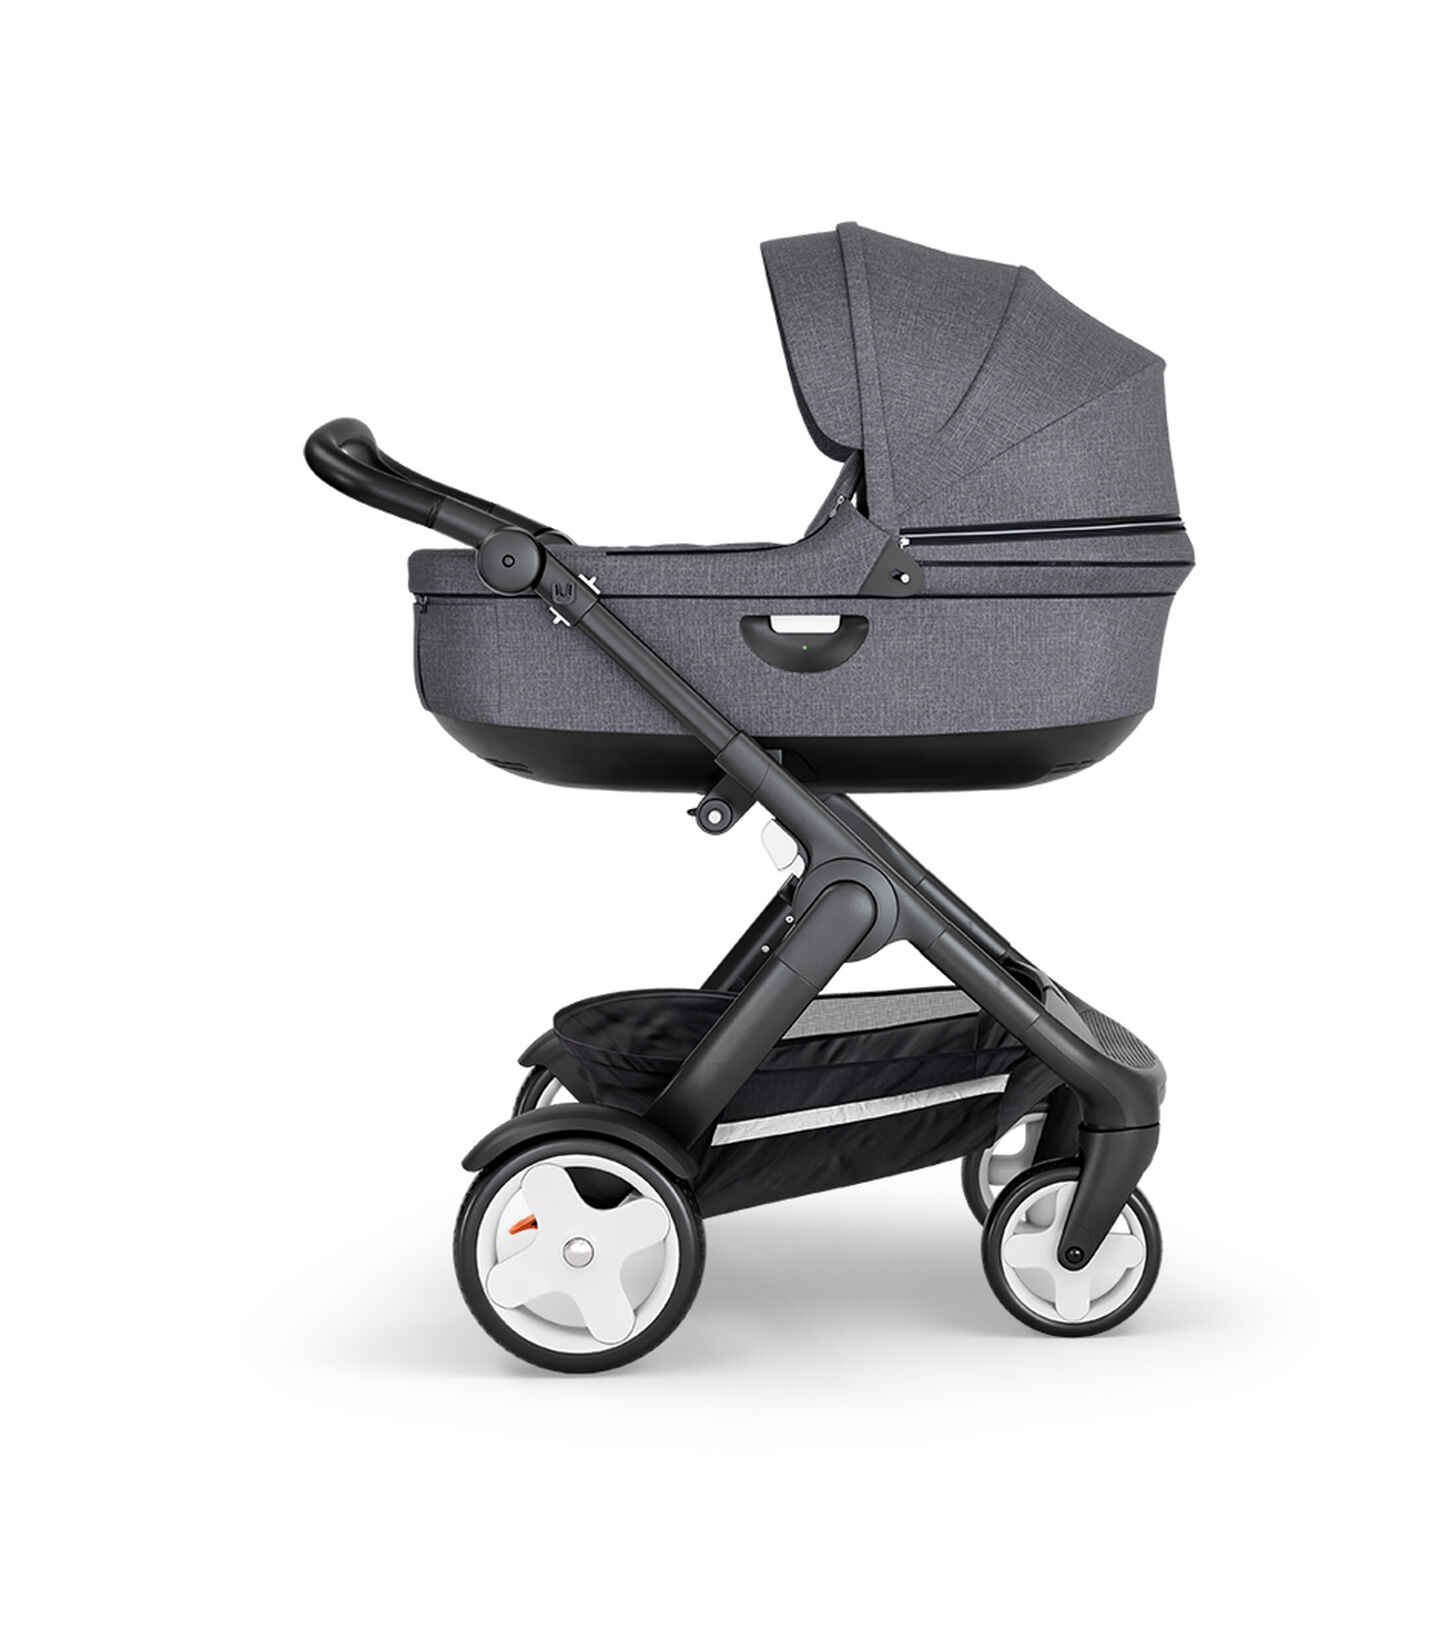 Stokke® Trailz™ with Black Chassis, Black Leatherette and Classic Wheels. Stokke® Stroller Carry Cot, Black Melange. view 2